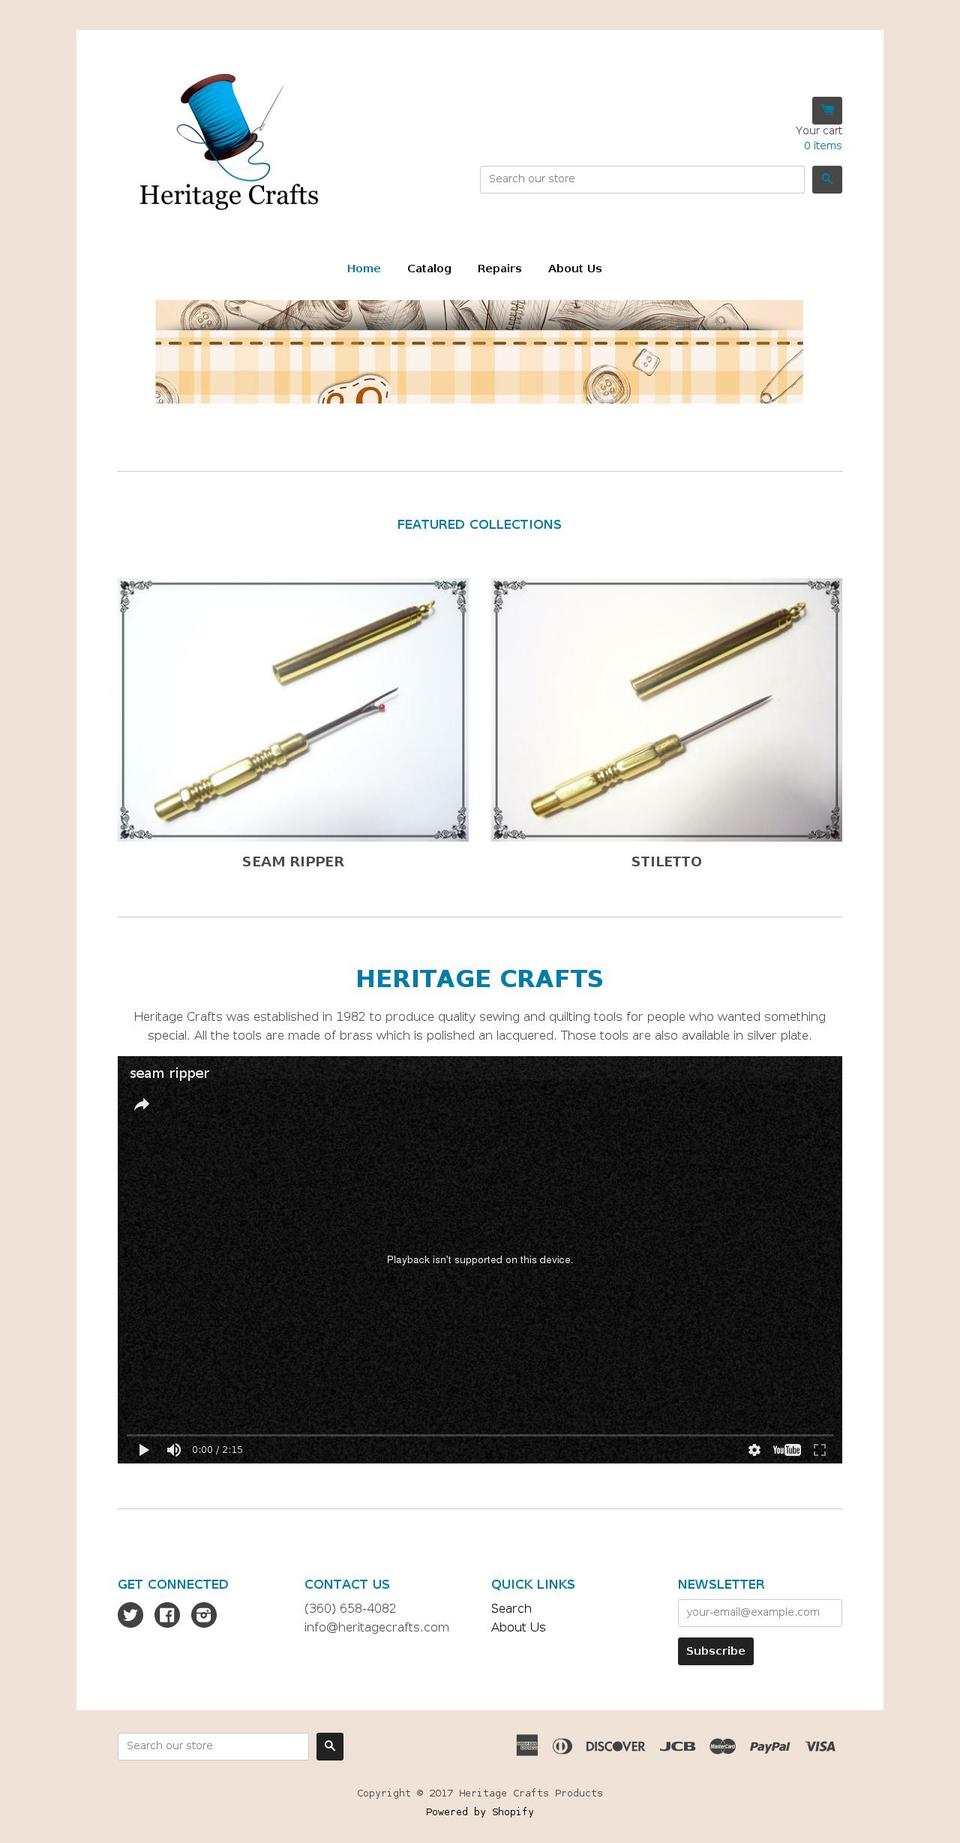 qeretail Shopify theme site example heritage-crafts.com